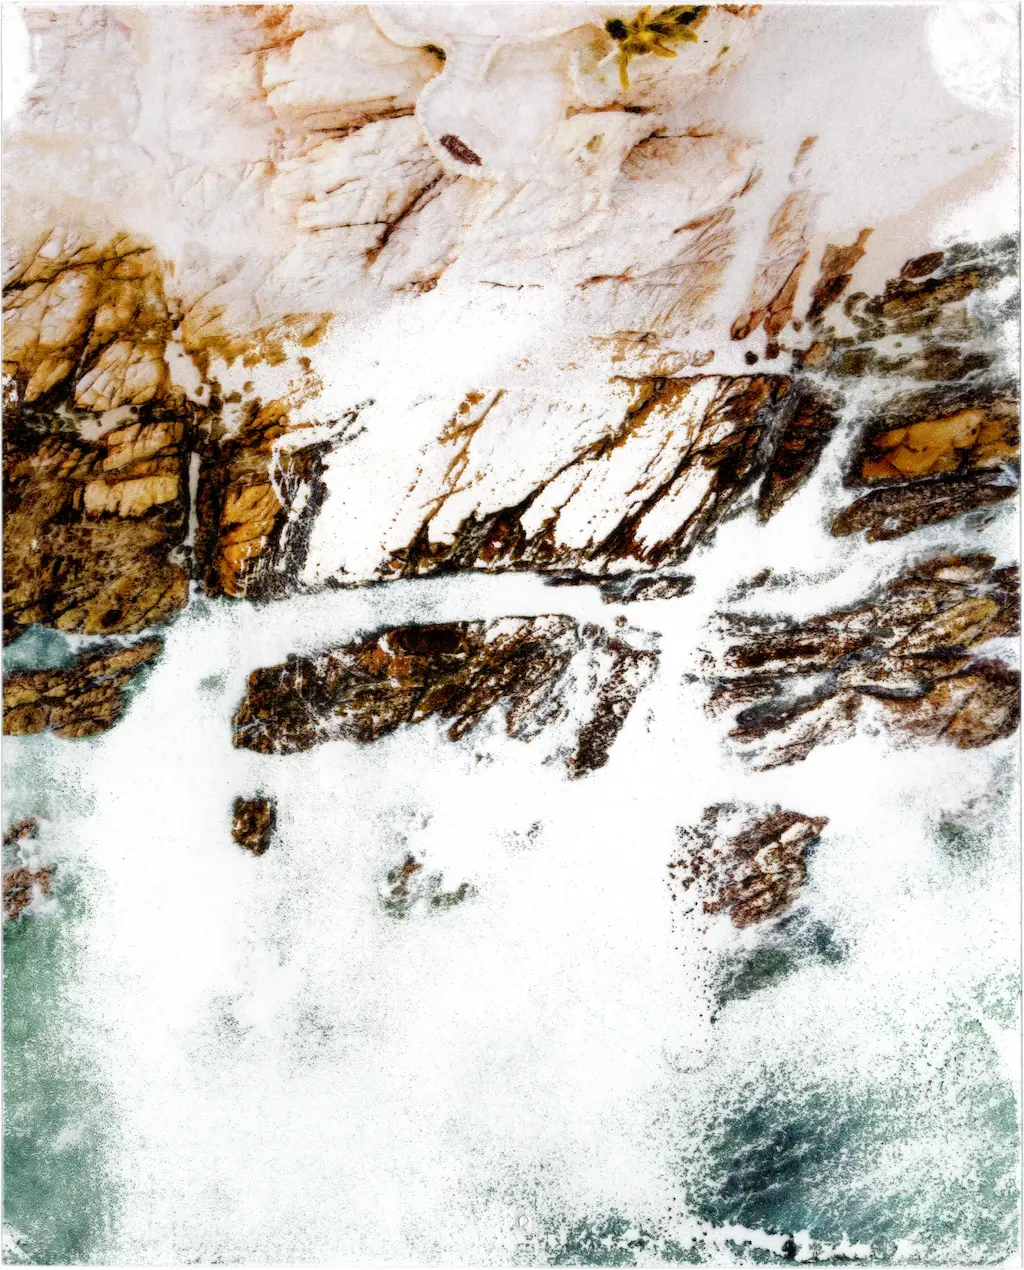 An aerial image of a rocky mediterranean coastline printed on acetate and bathed in disinfectant. The darker areas of the print have a higher concentration of ink resulting in that area withstanding the disinfectant longer. This means most of the light greenish blue hues of the ocean have washed away while the darker tones of the rocky coastline have remained. Some of the most ink rich areas of the image have glooped and glopped together during the disinfectant bath causing them to coagulate into messy strands of dark tones, only holding onto the acetate at the very ends.